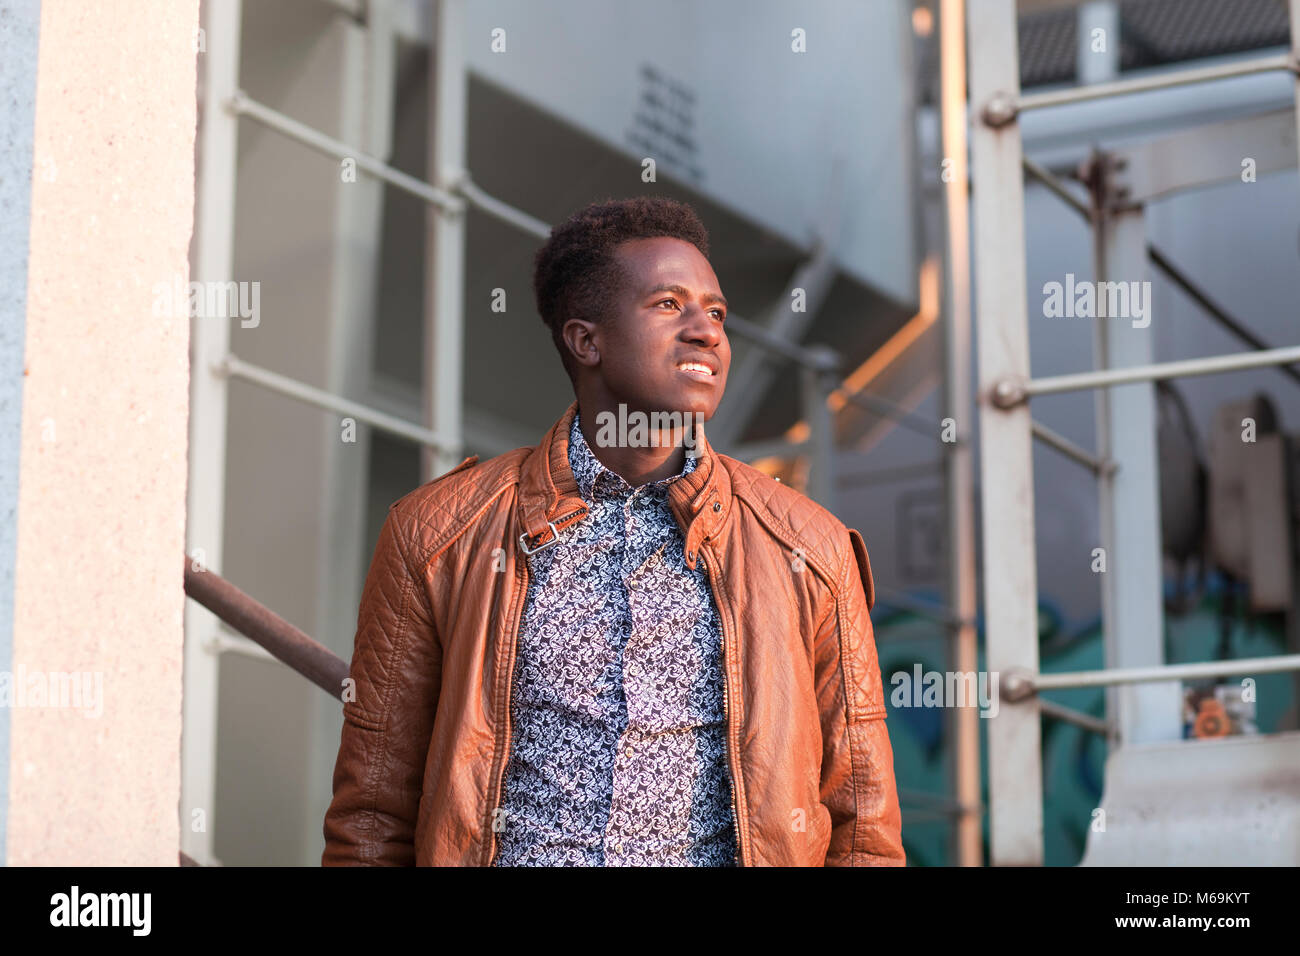 A handsome young black man in sunlight in an industrial setting Stock Photo